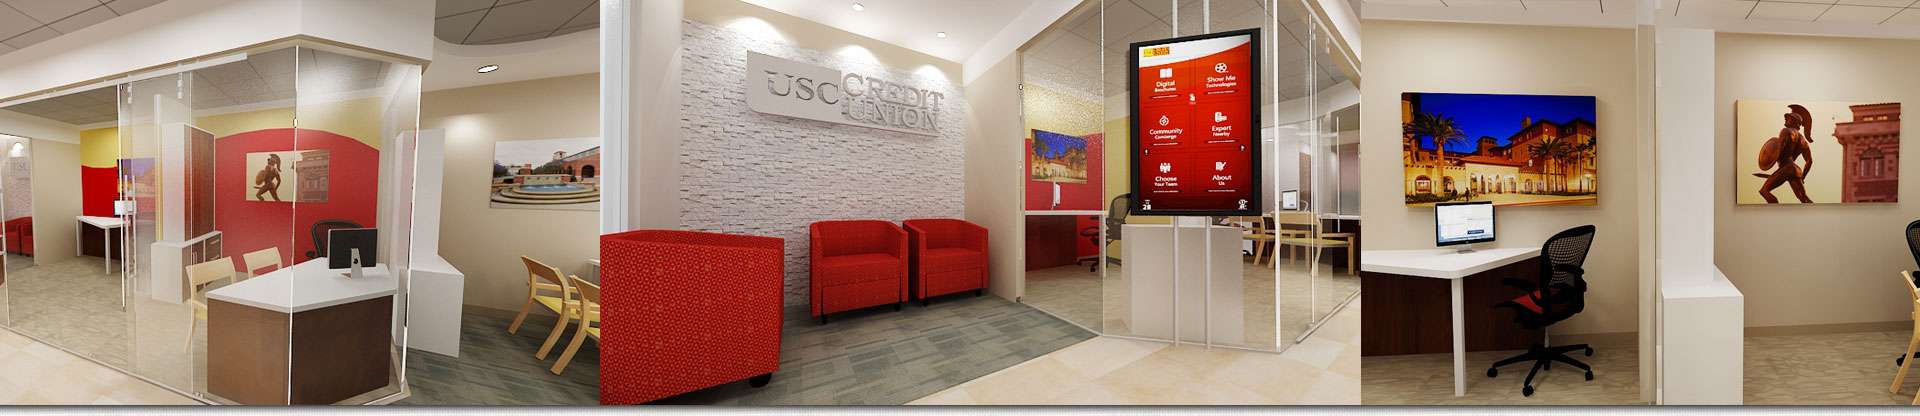 In the Fast Lane: USC Credit Union's Micro-Branch Race